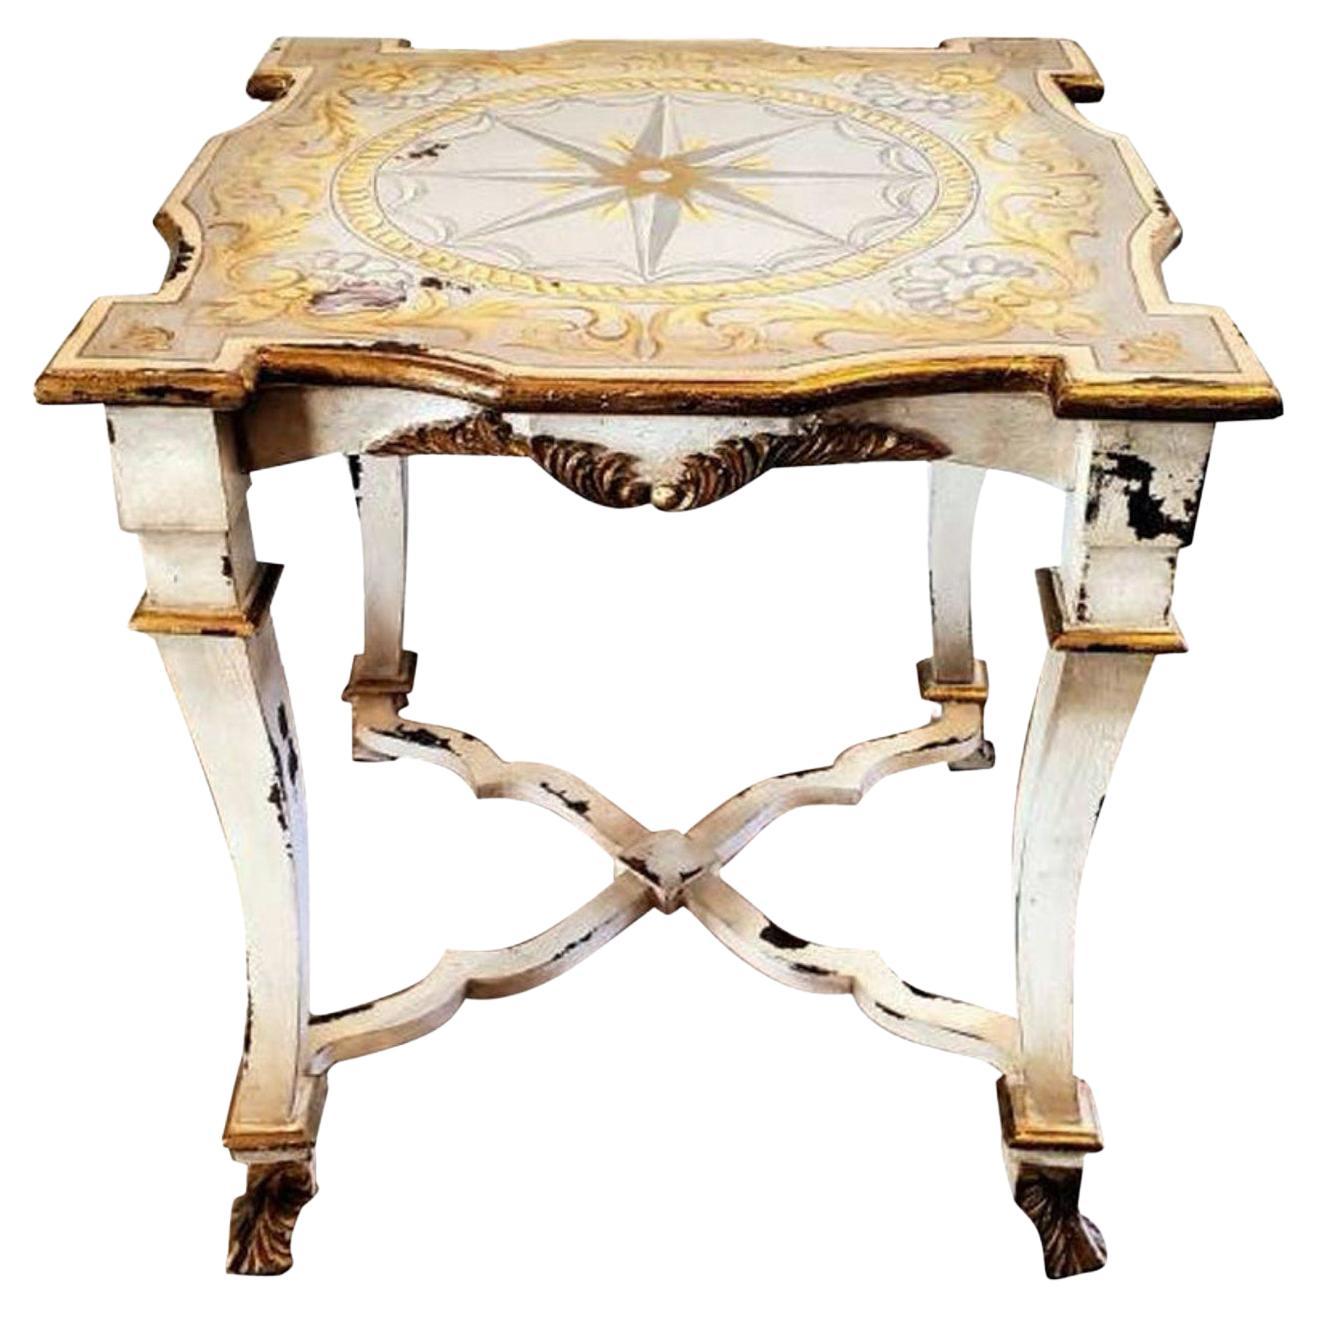 Guildmaster Neoclassical Style Carved Giltwood Compass Rose Table For Sale